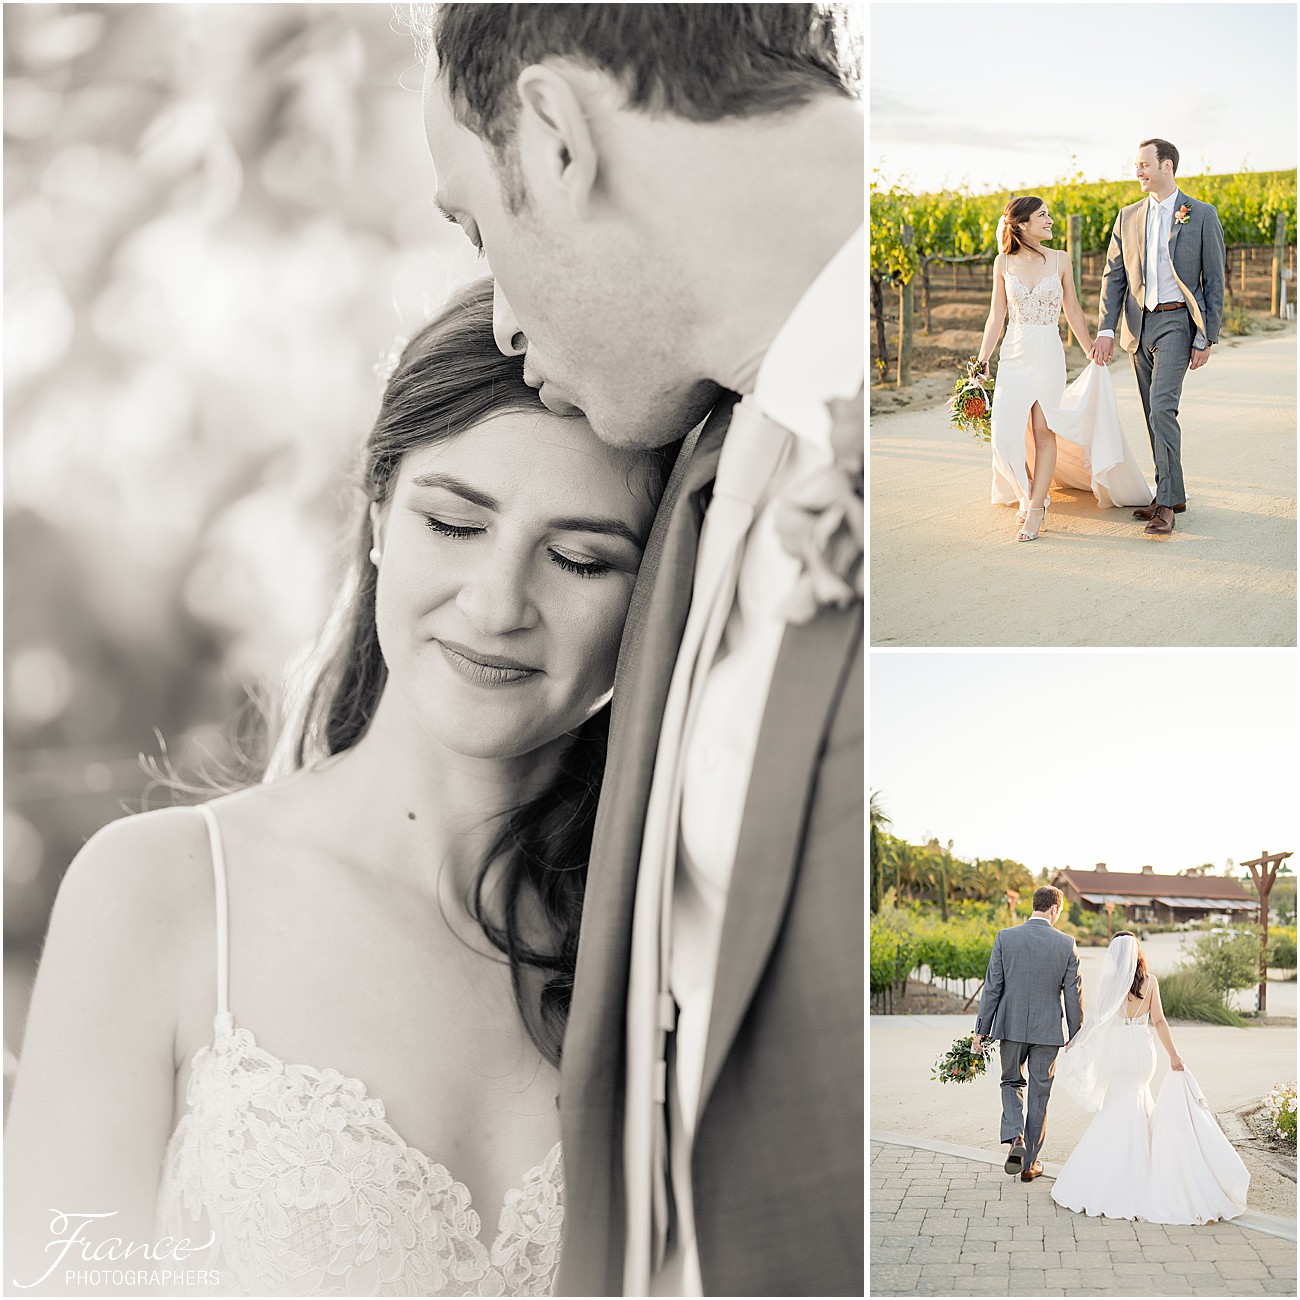 Peltzer Winery Temecula Spring Bride and Groom Portraits